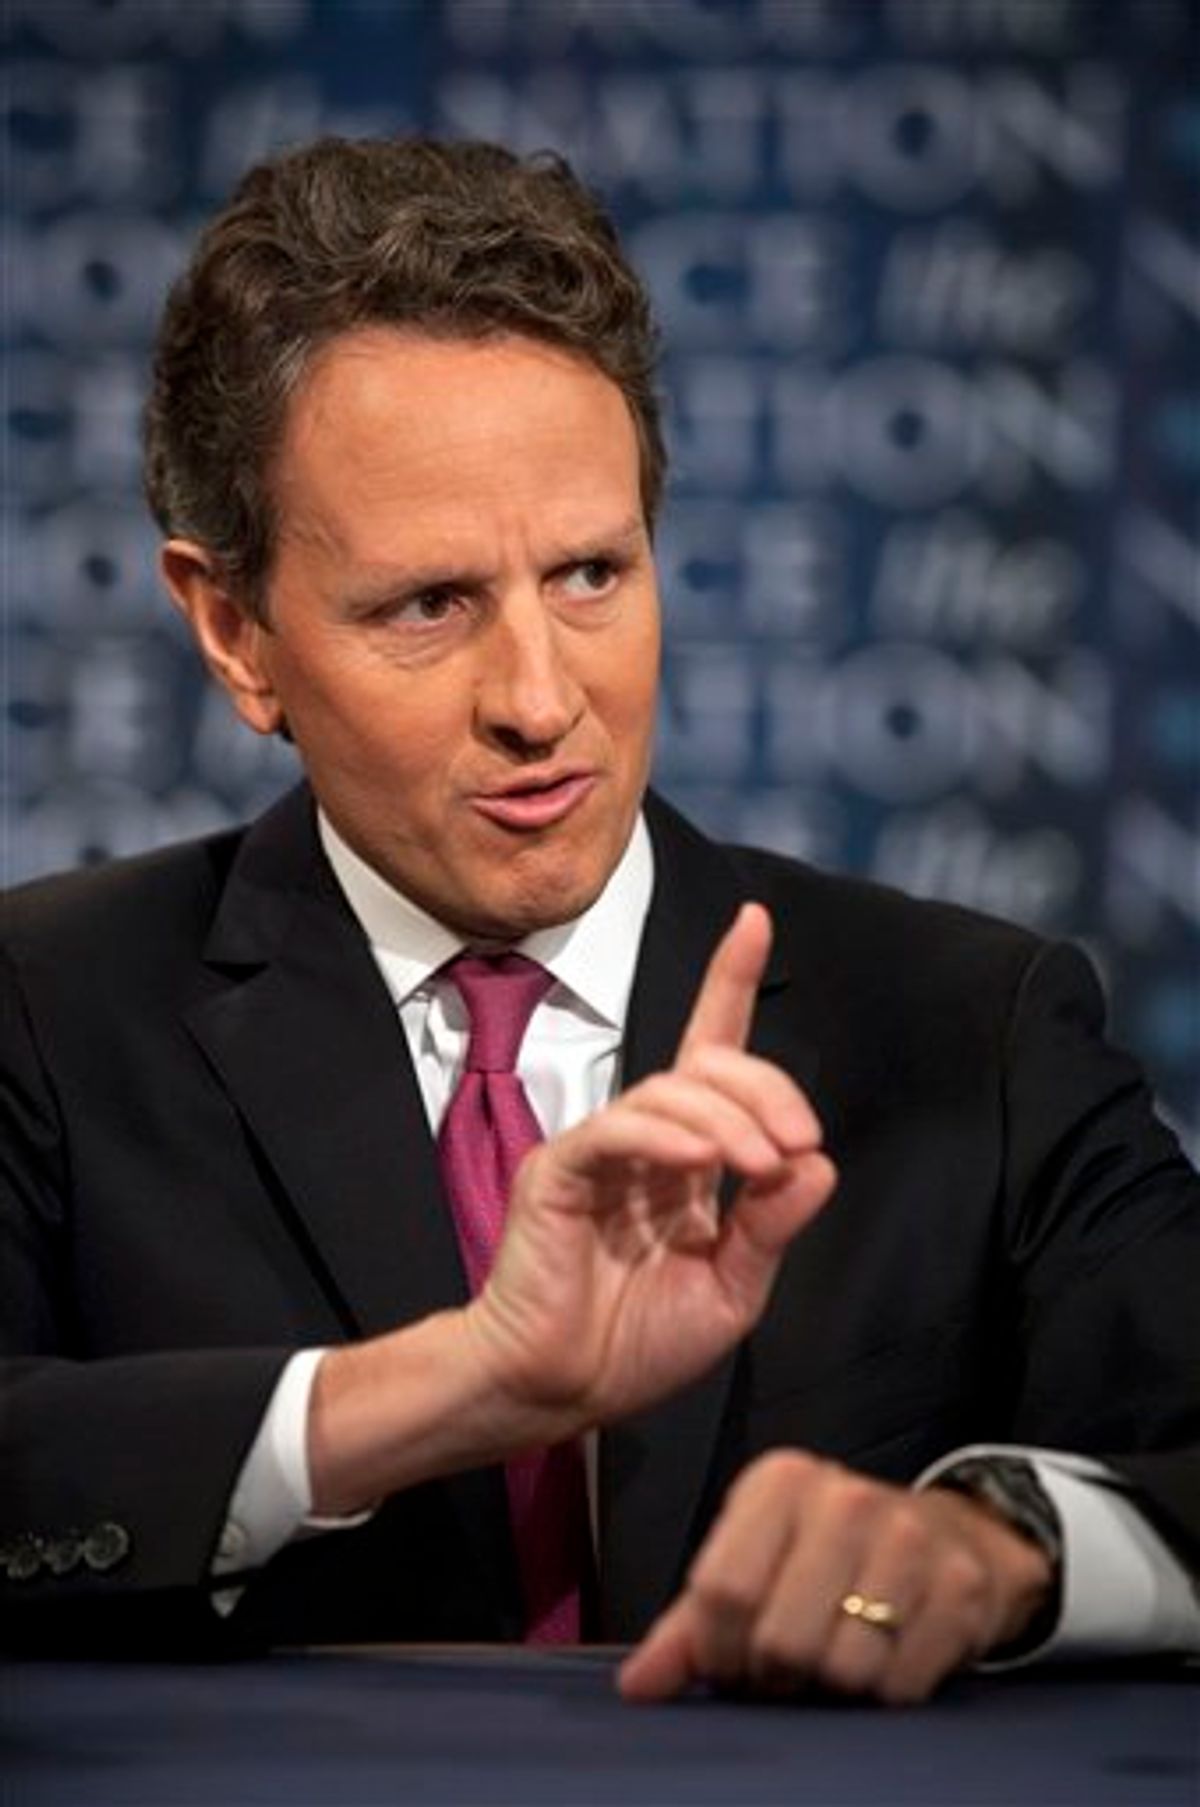 In this photo provided by CBS News, U.S. Treasury Secretary Timothy Geithner talks about the debt crisis on CBS's "Face the Nation" in Washington Sunday, July 10, 2011. Geithner said Sunday that the Obama administration wants to seek "the biggest deal possible" on debt reduction. His comments followed word from GOP congressional leaders Sunday that the White House's $4 trillion package was off the table. (AP Photo/CBS News, Chris Usher) (AP)